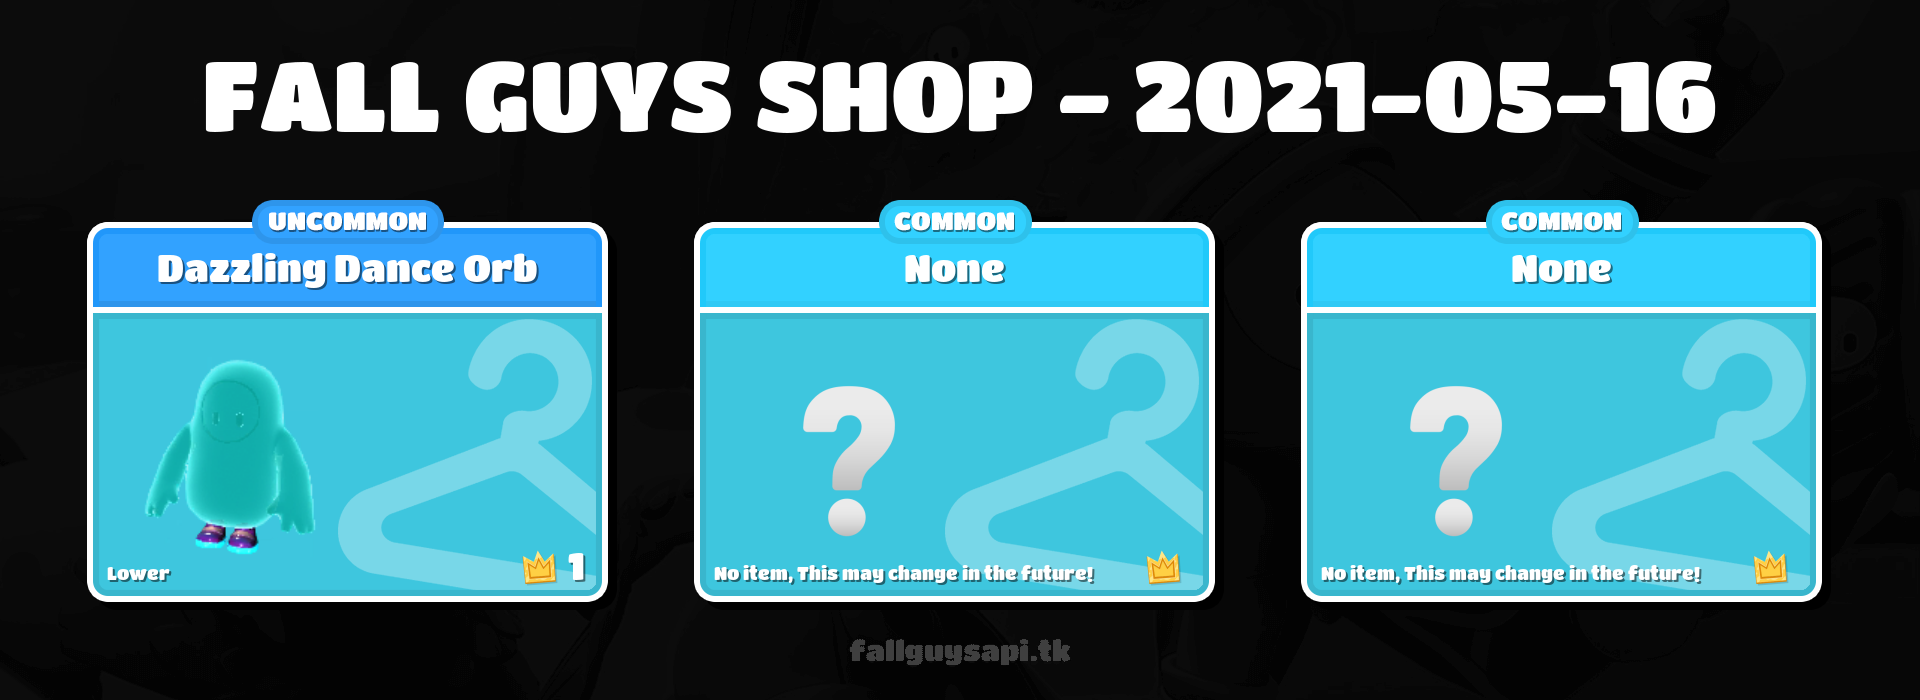 Fall Guys: Ultimate Knockout - [S4] Featured shop - What's on sale? - May 16 - May 19